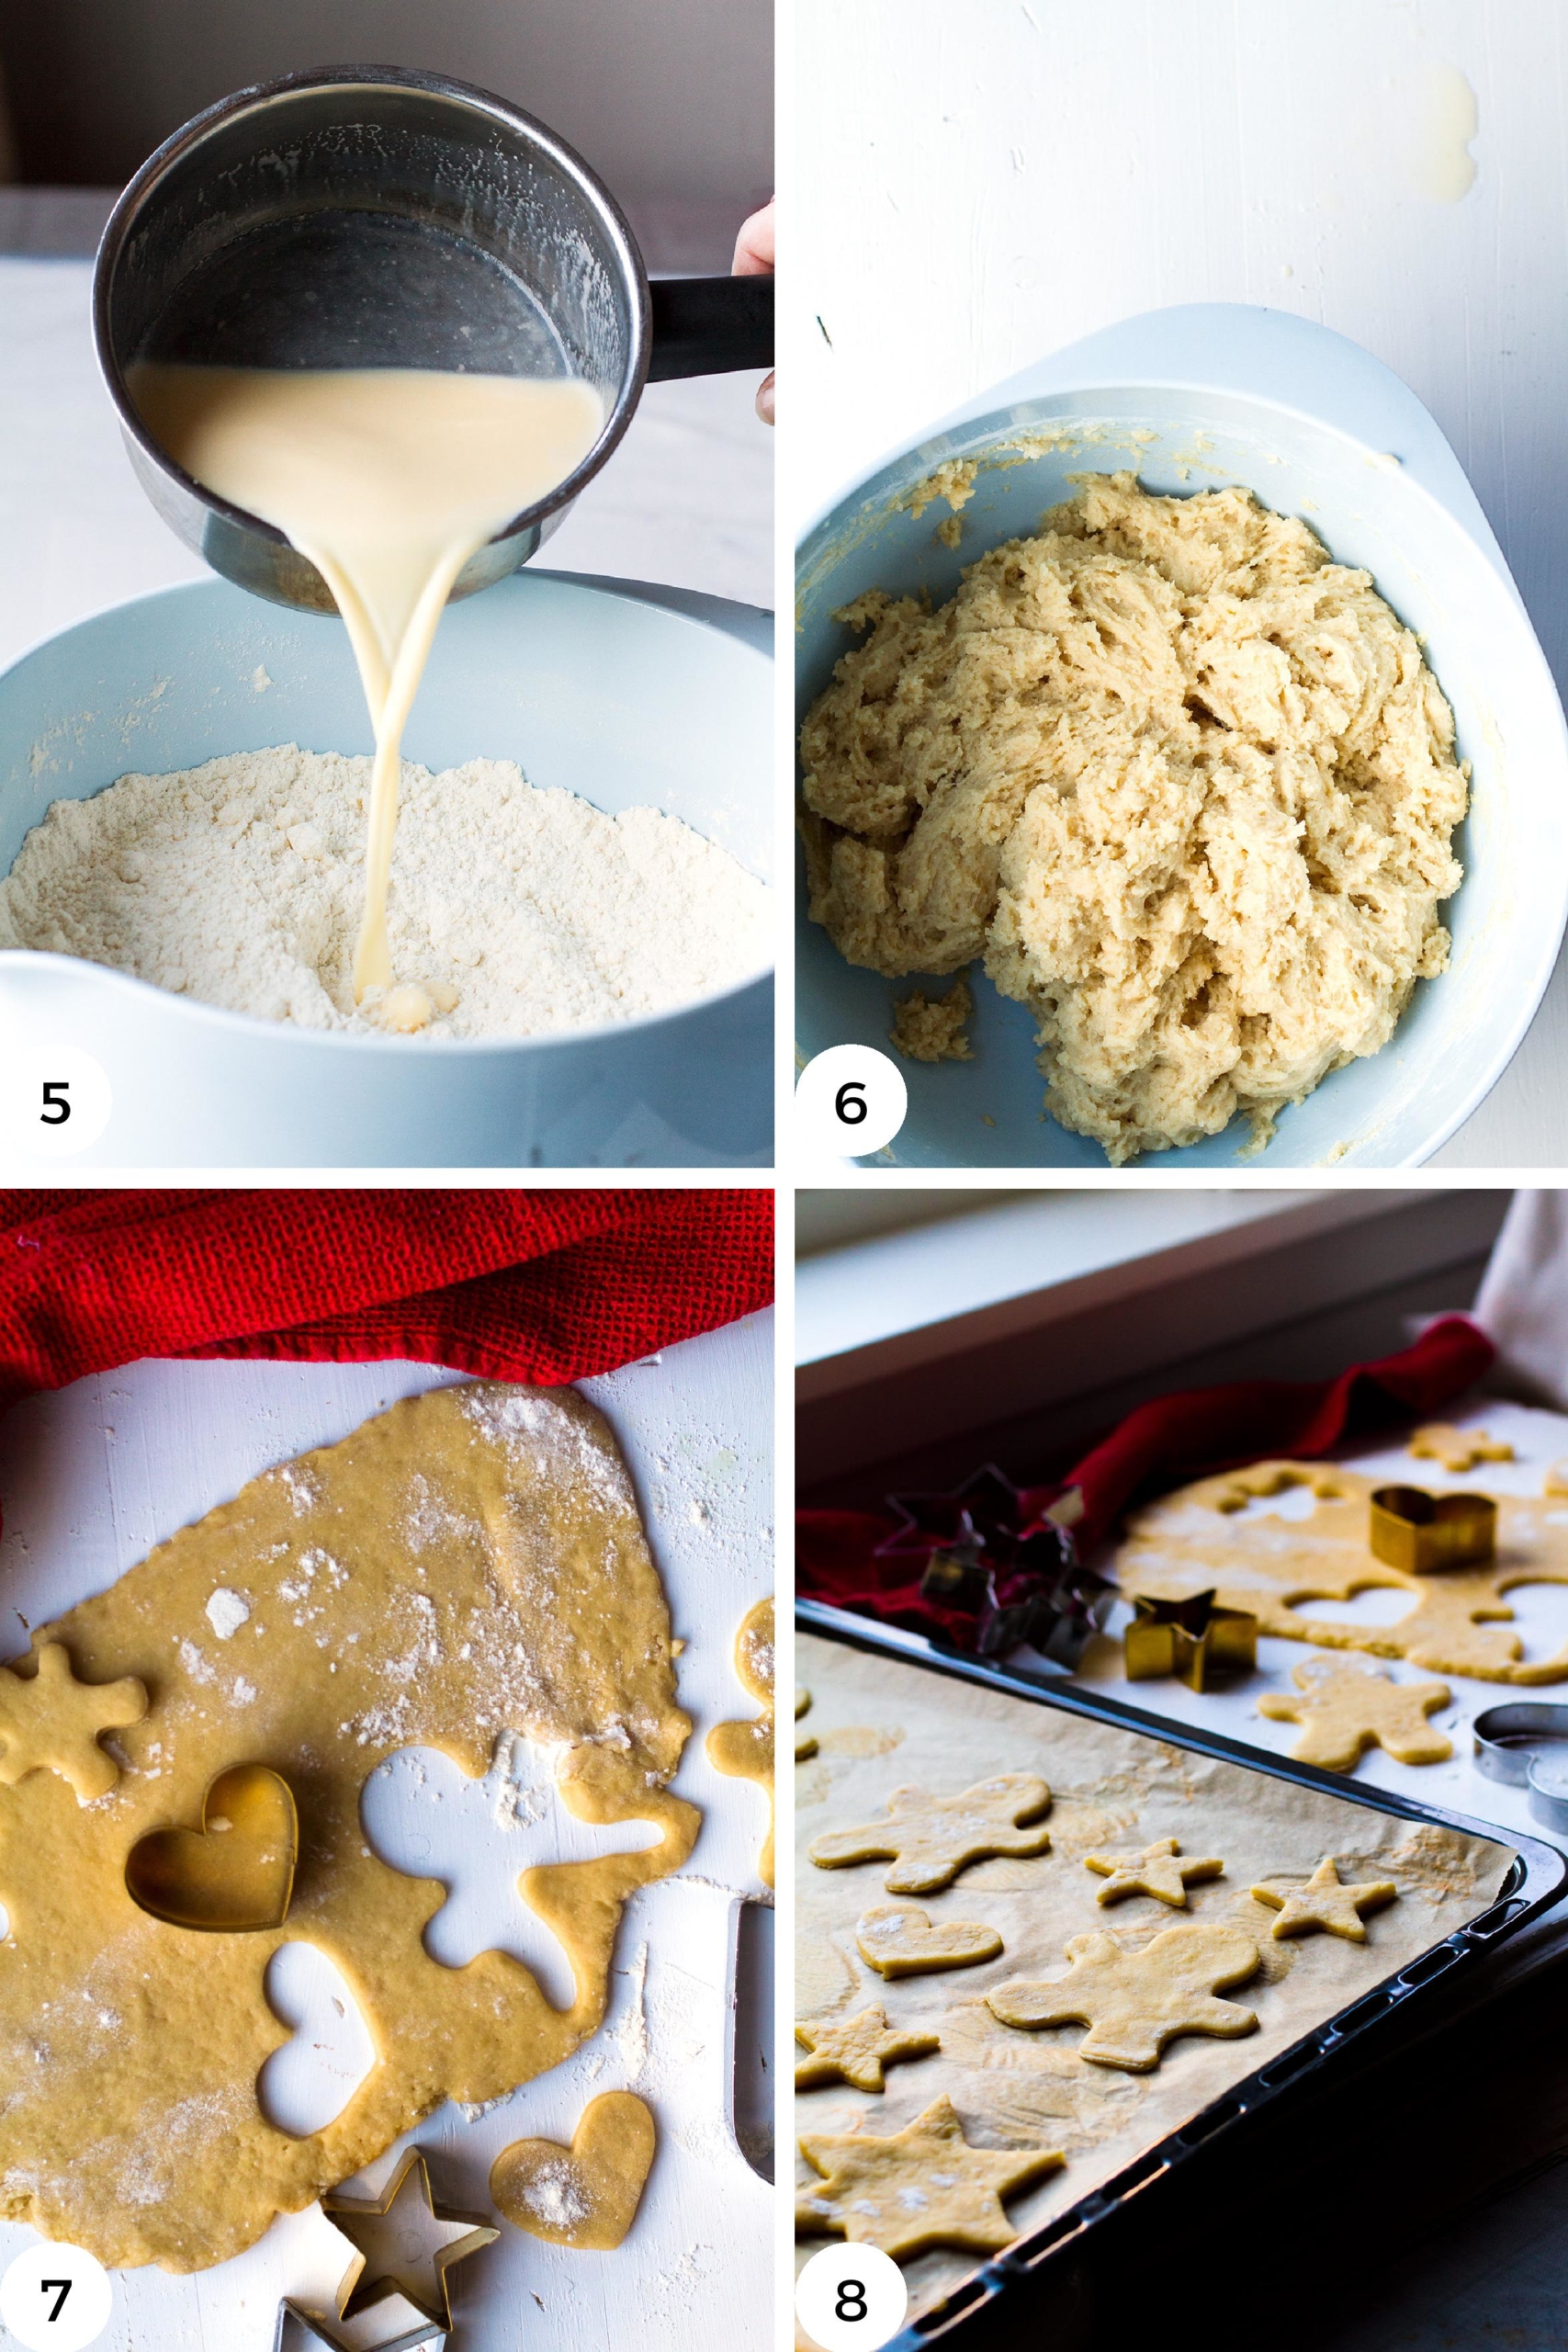 Steps to make and shape the Christmas men cookies.